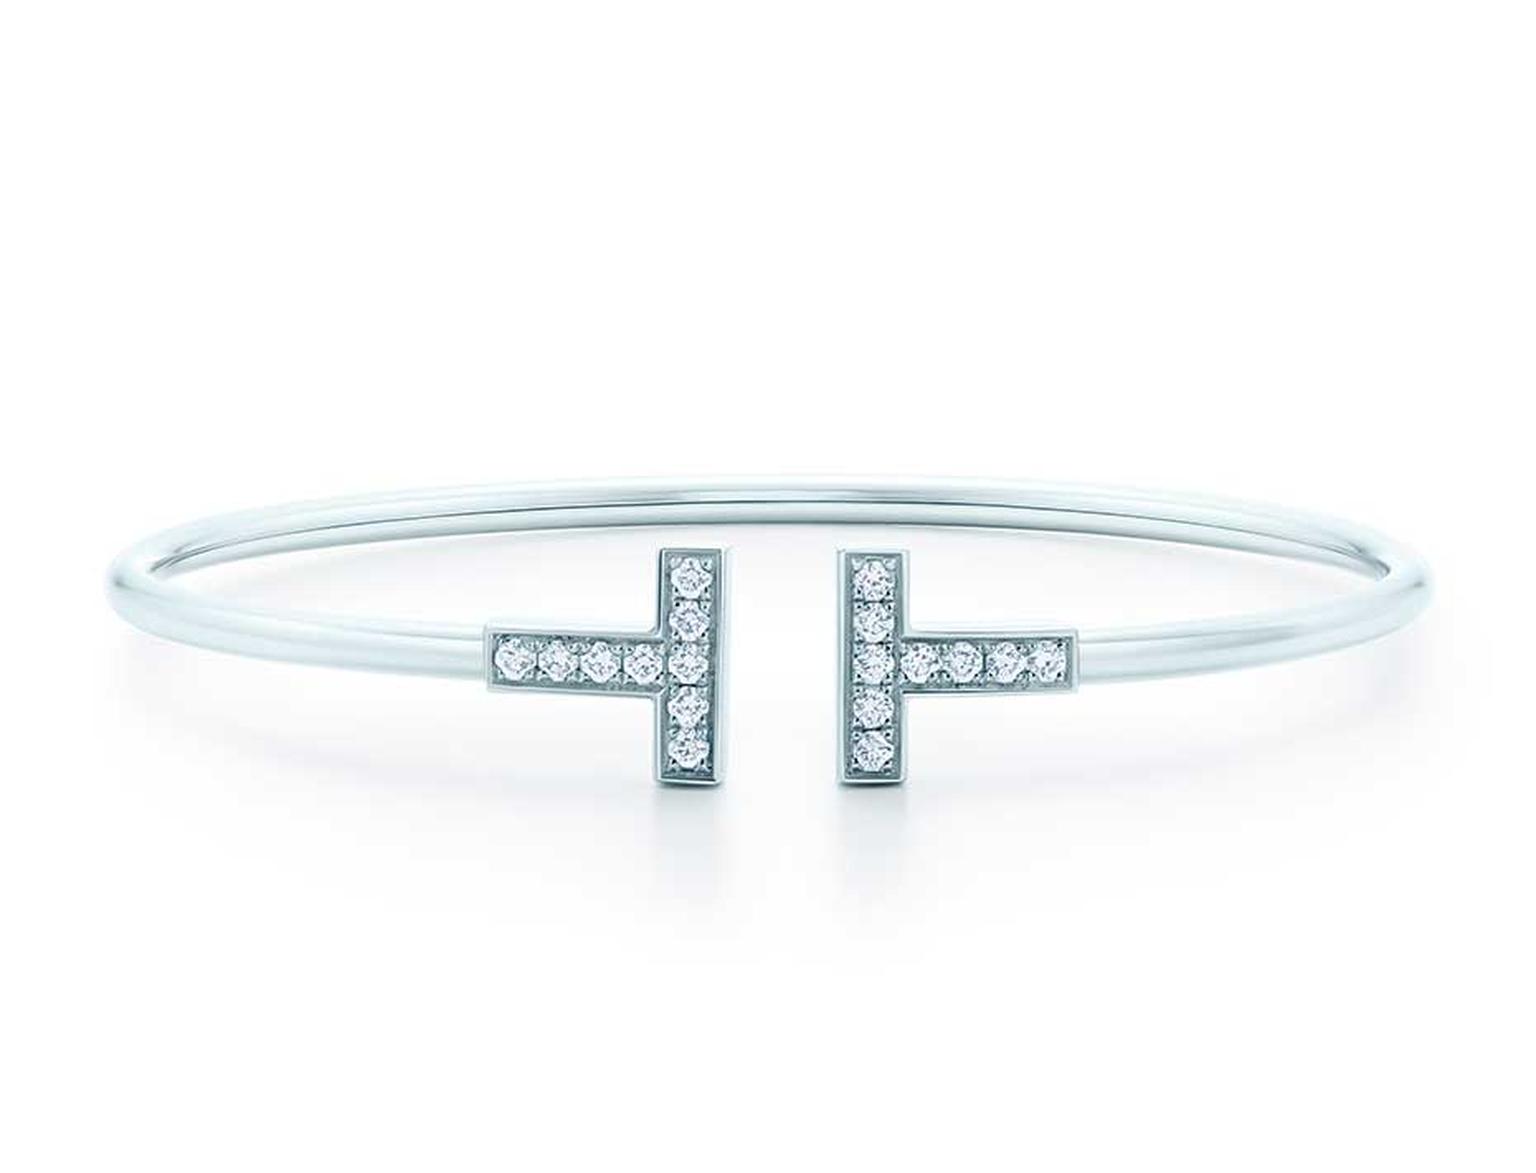 Tiffany T wire bracelet in white gold with diamonds (£2,450).